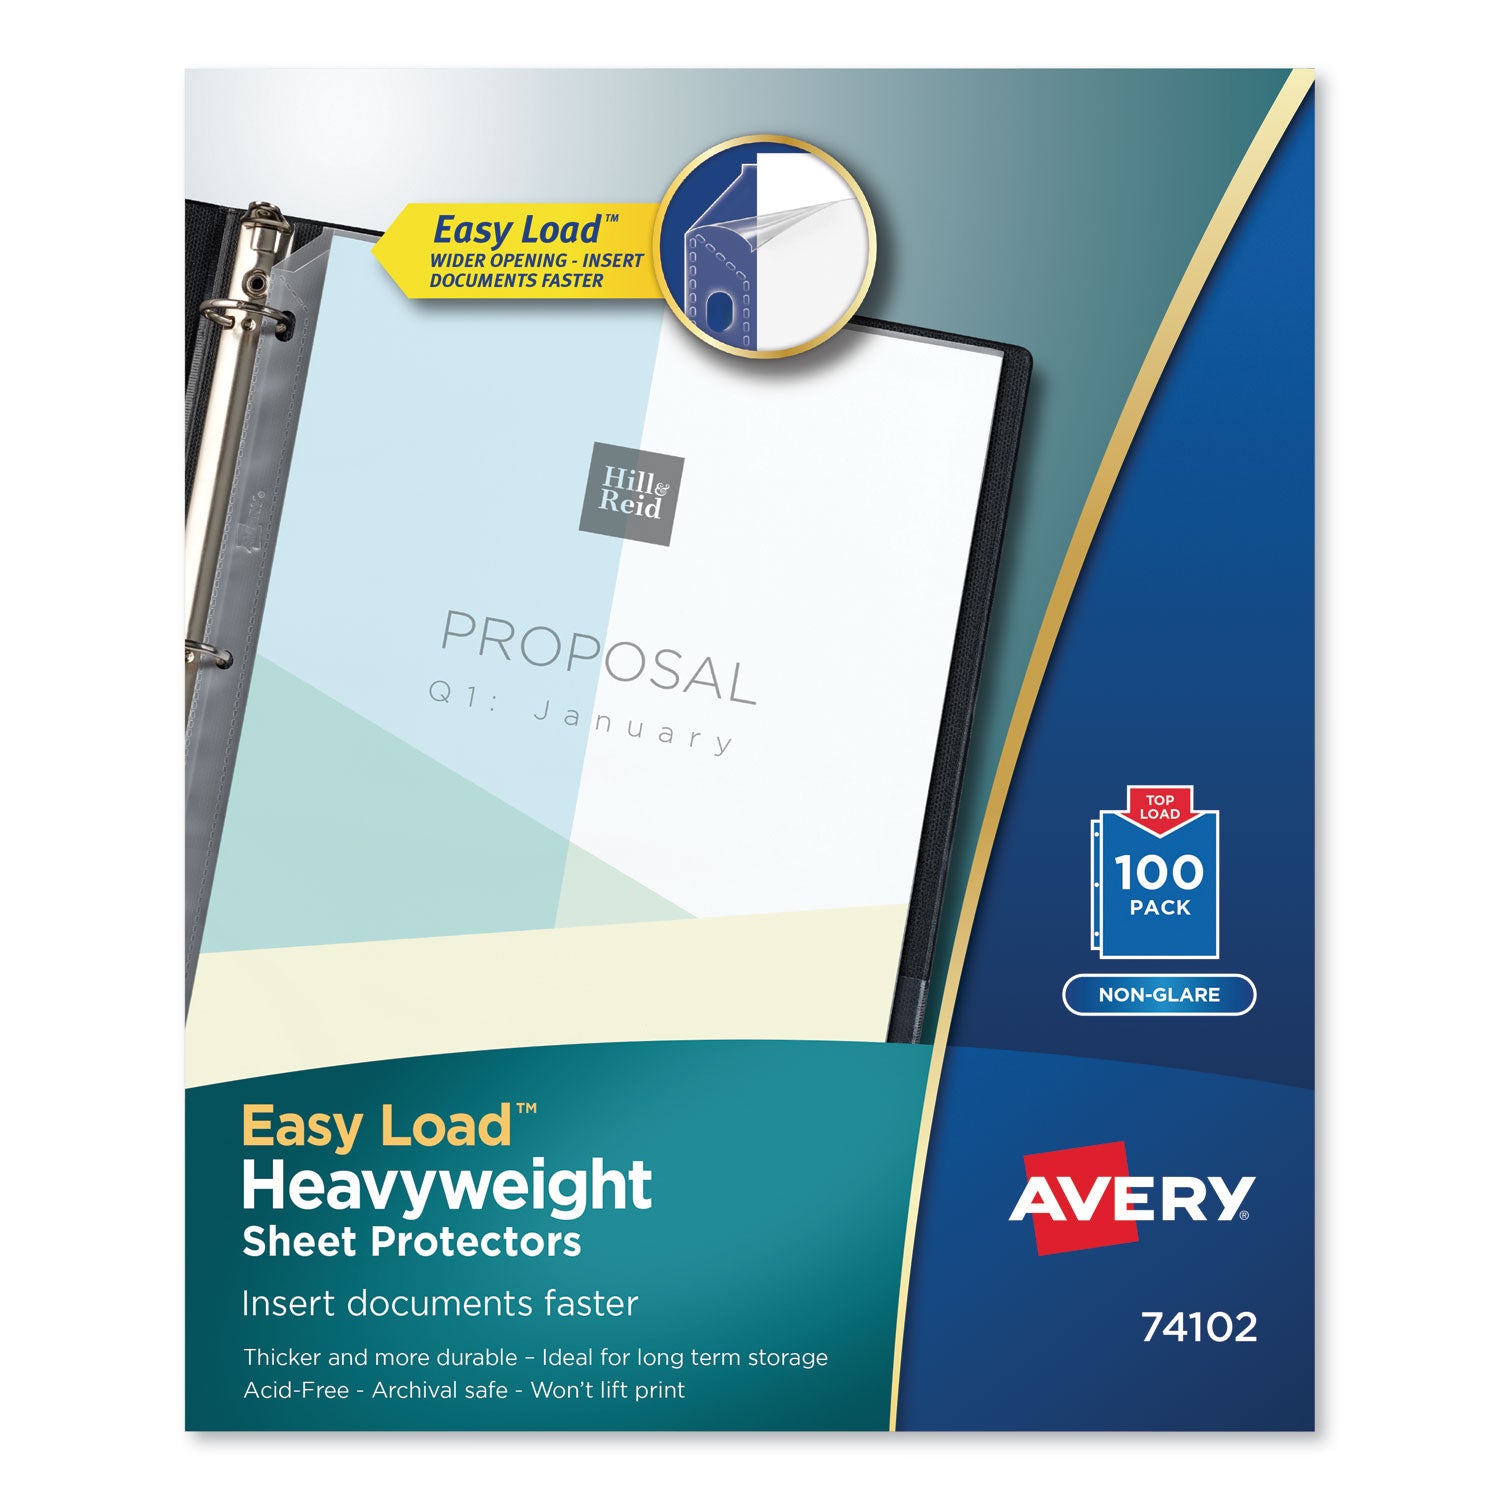 top-load-poly-sheet-protectors-heavy-gauge-letter-nonglare-100-box_ave74102 - 1